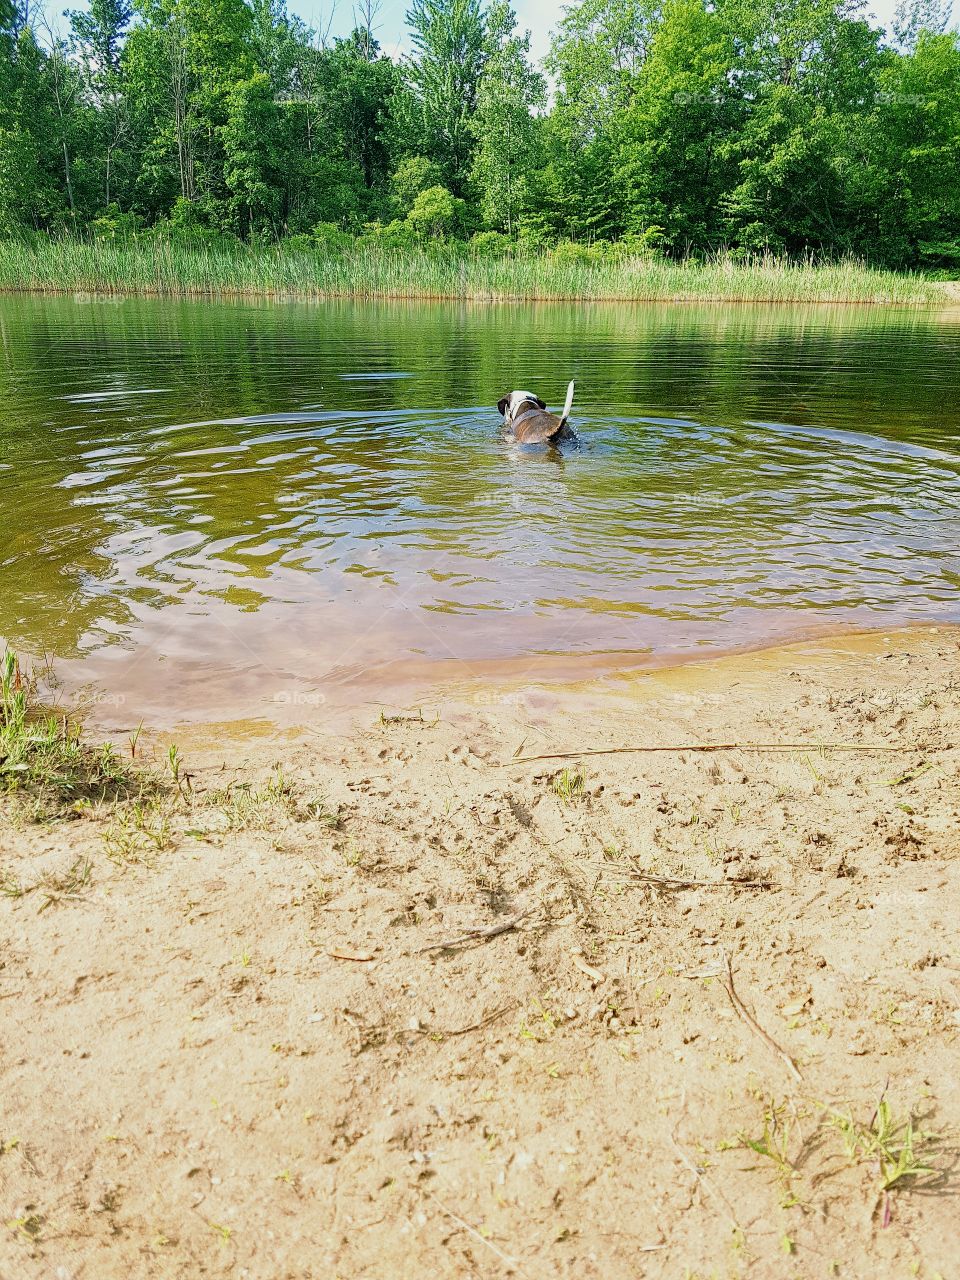 A dog going for a swim in a local water hole.